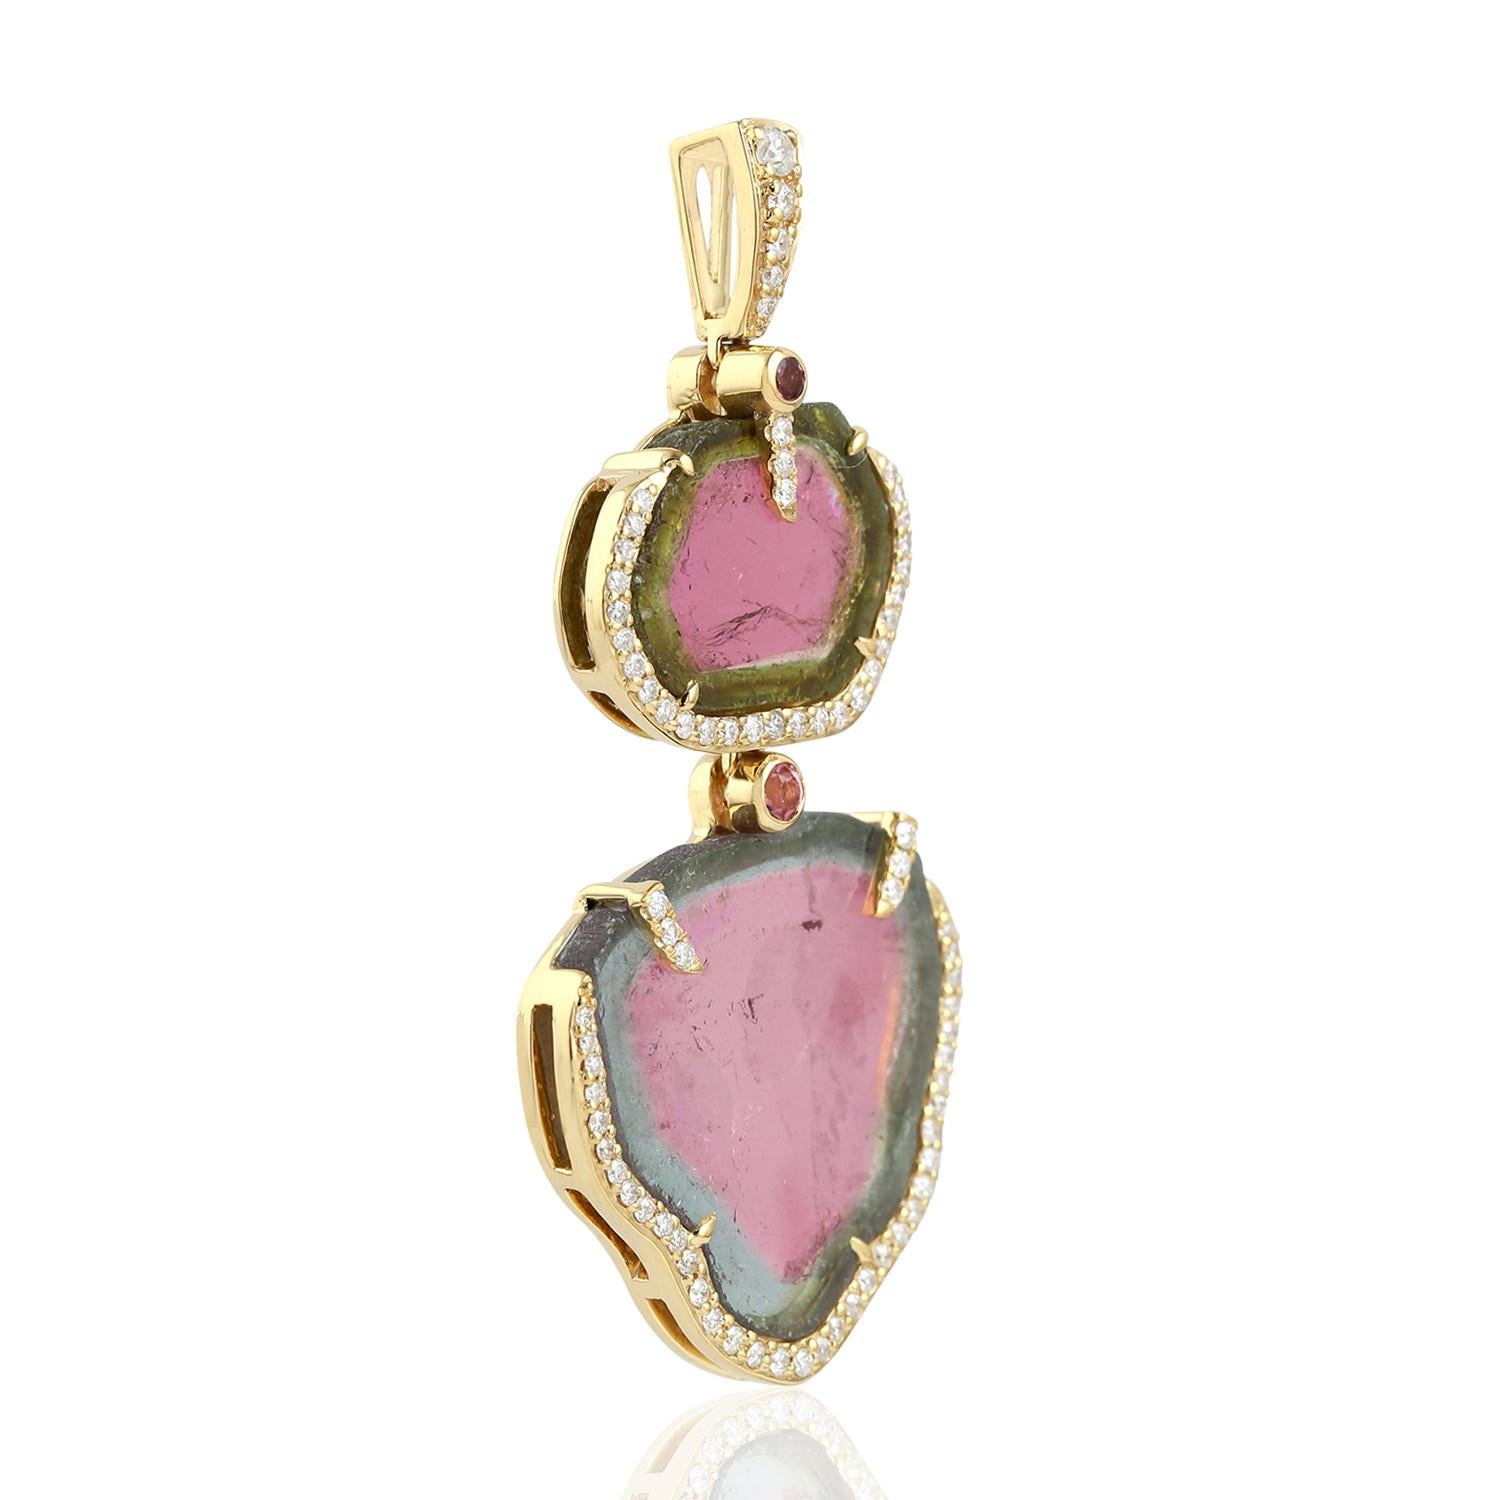 This stunning pendant has been meticulously crafted from 18-karat gold. It is set with 25.09 carats of watermelon tourmaline & .69 carats of sparkling diamonds.

FOLLOW  MEGHNA JEWELS storefront to view the latest collection & exclusive pieces. 